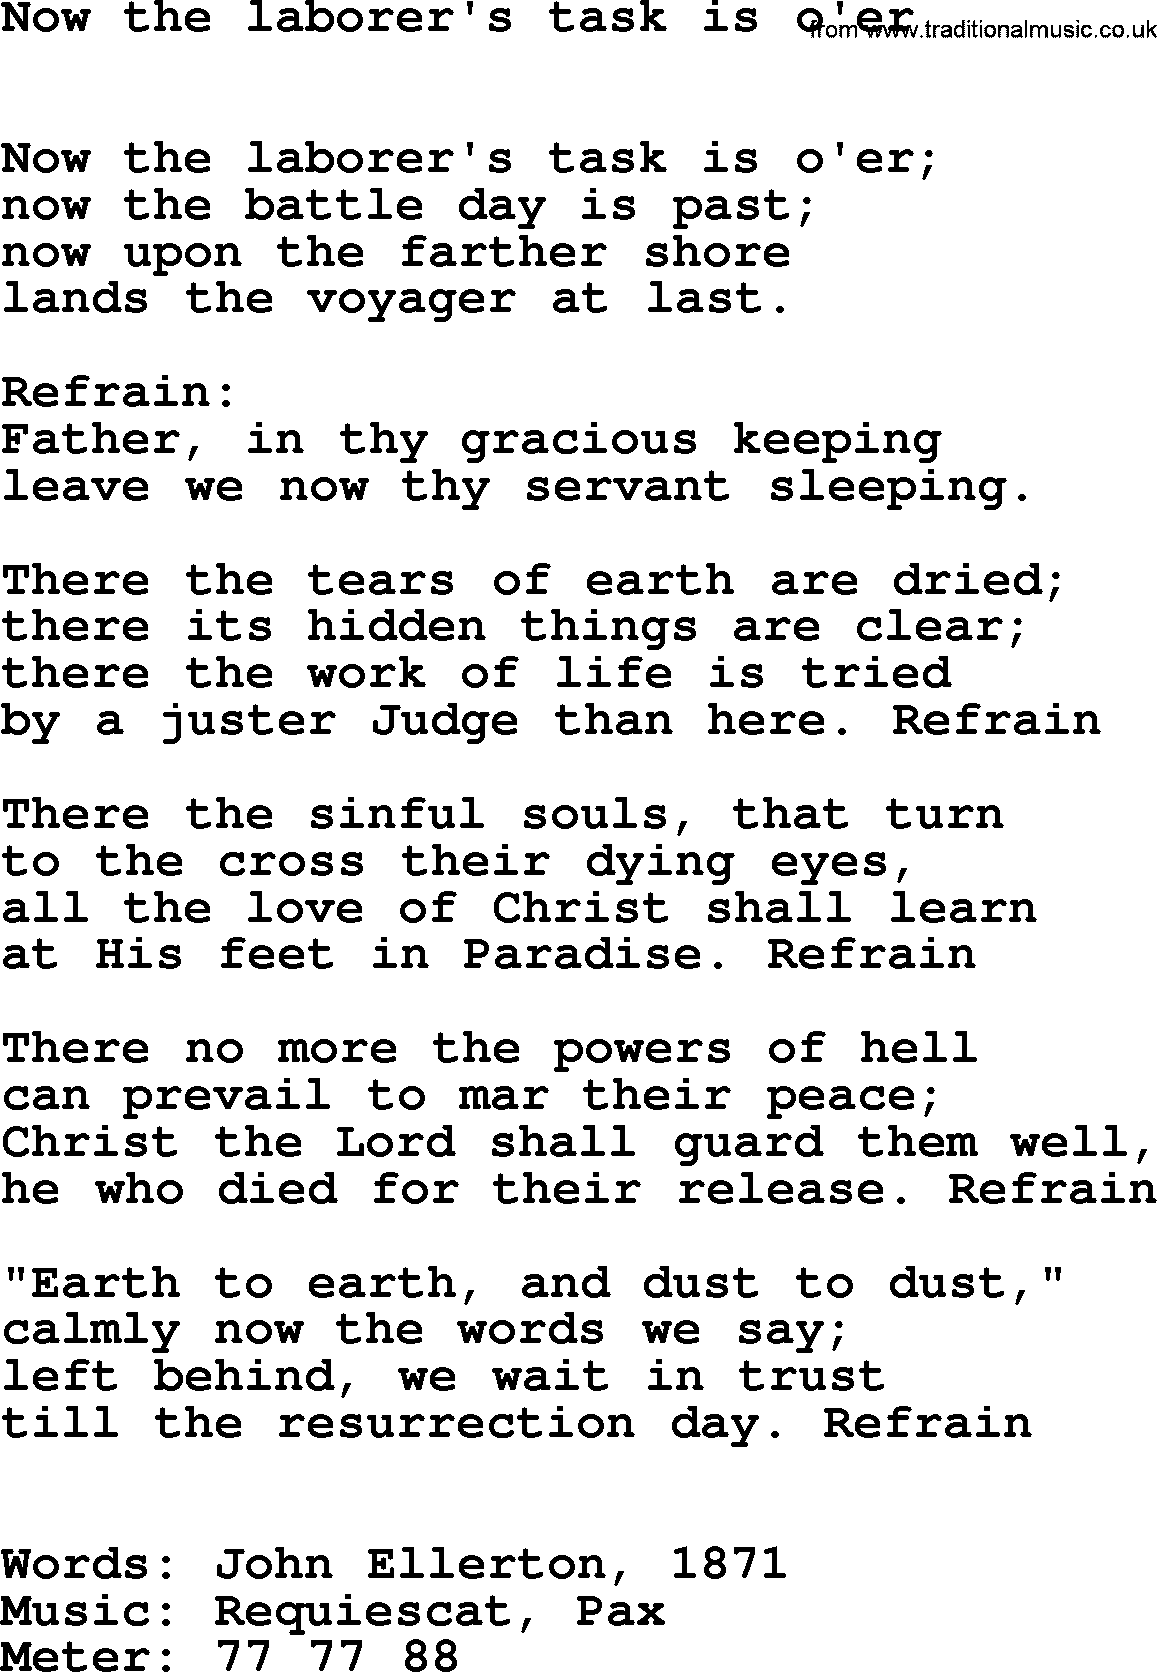 Hymns Ancient and Modern Hymn: Now The Laborer's Task Is O'er, lyrics with midi music